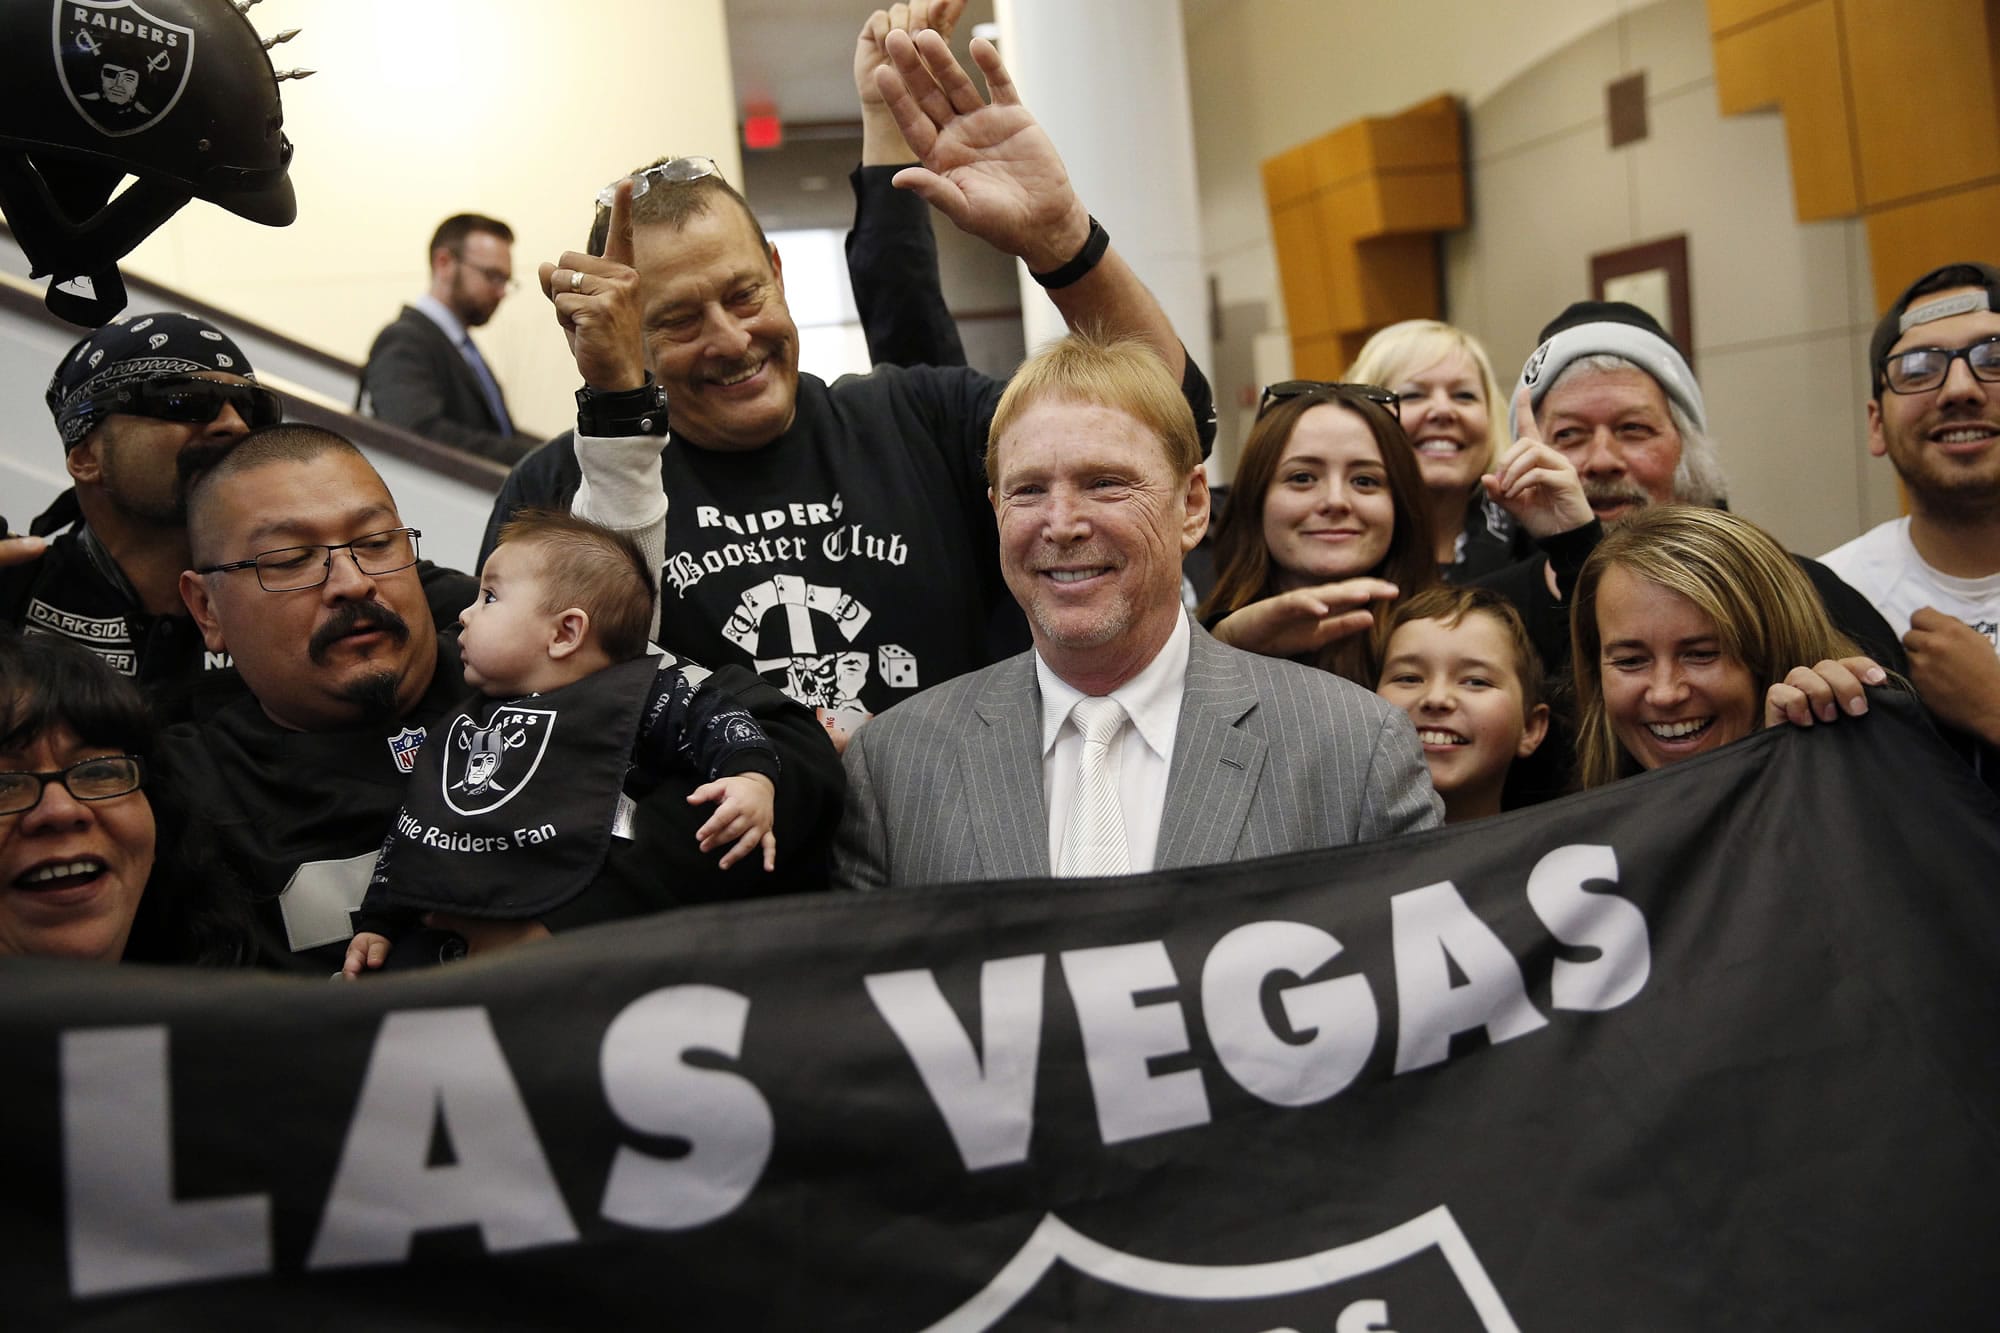 Oakland Raiders owner Mark Davis, center, meets with Raiders fans after speaking at a meeting of the Southern Nevada Tourism Infrastructure Committee in Las Vegas in April. The Raiders have filed paperwork to move to Las Vegas. Clark County Commission Chairman Steve Sisolak told The Associated Press on Thursday, Jan. 19, 2017,  that he spoke with the Raiders.